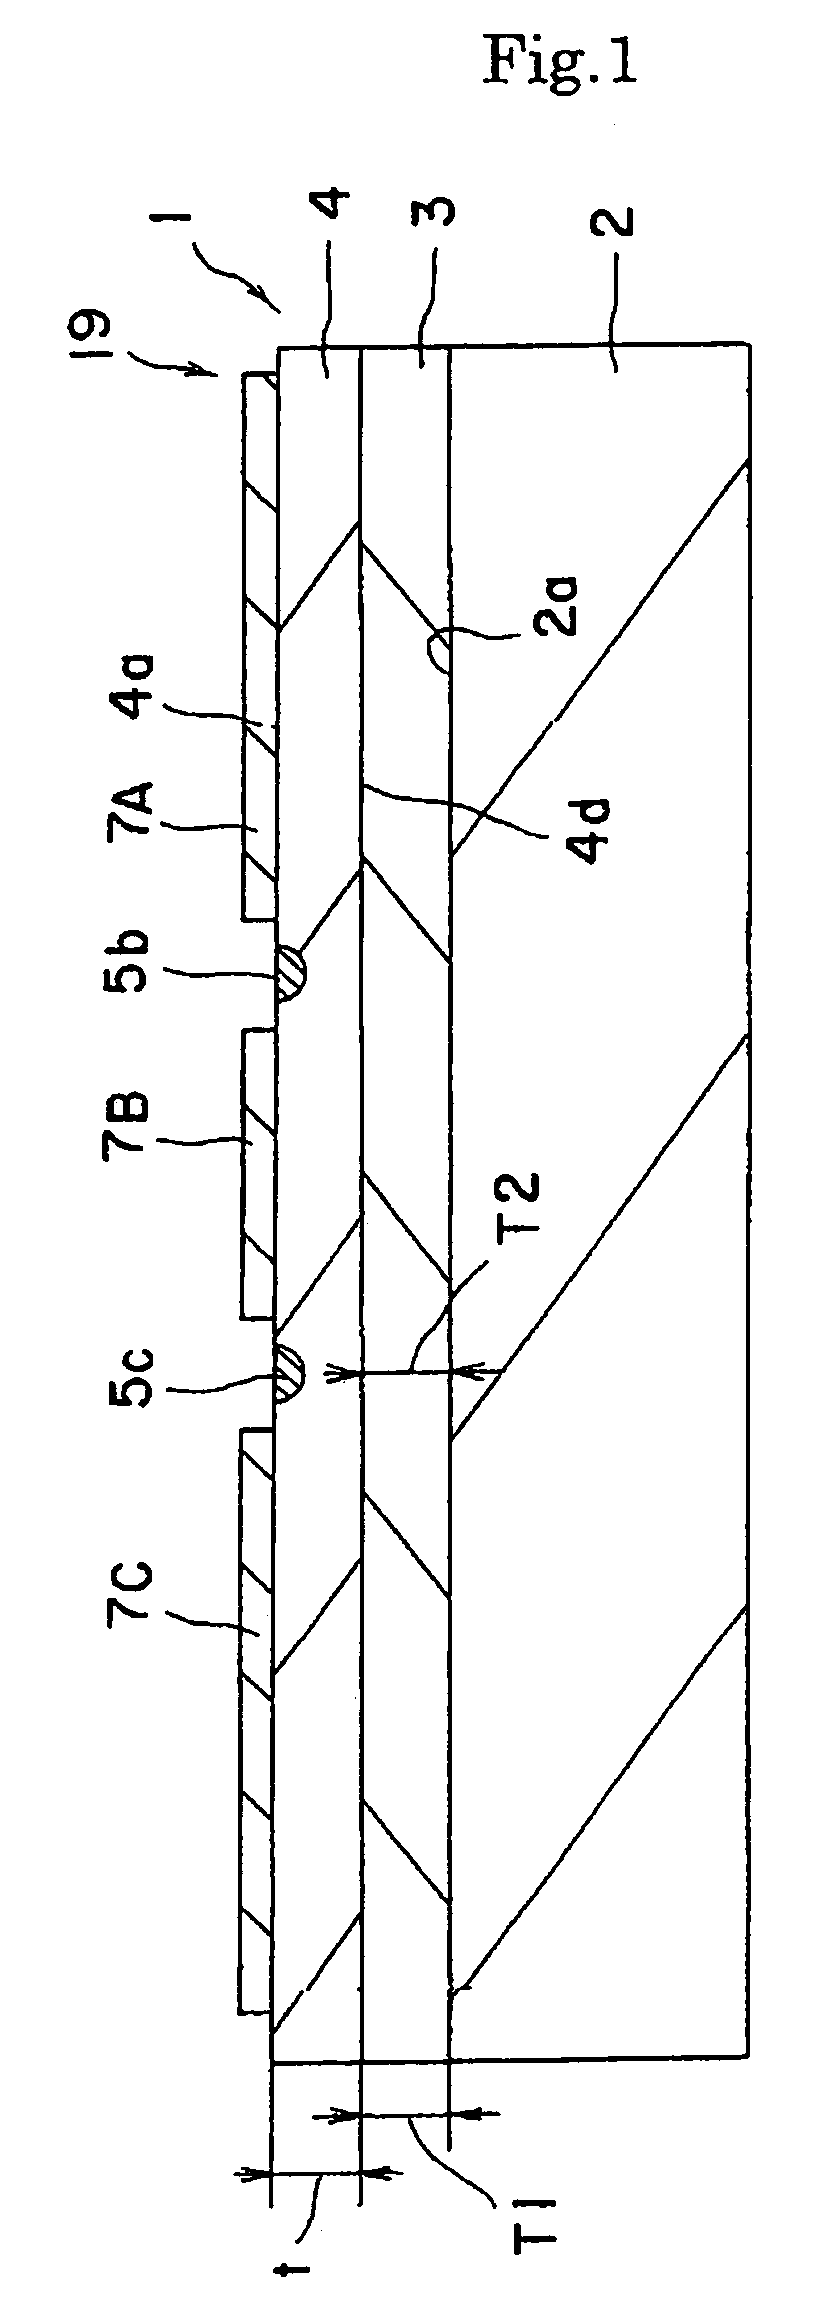 Optical waveguide device, and a travelling wave form optical modulator